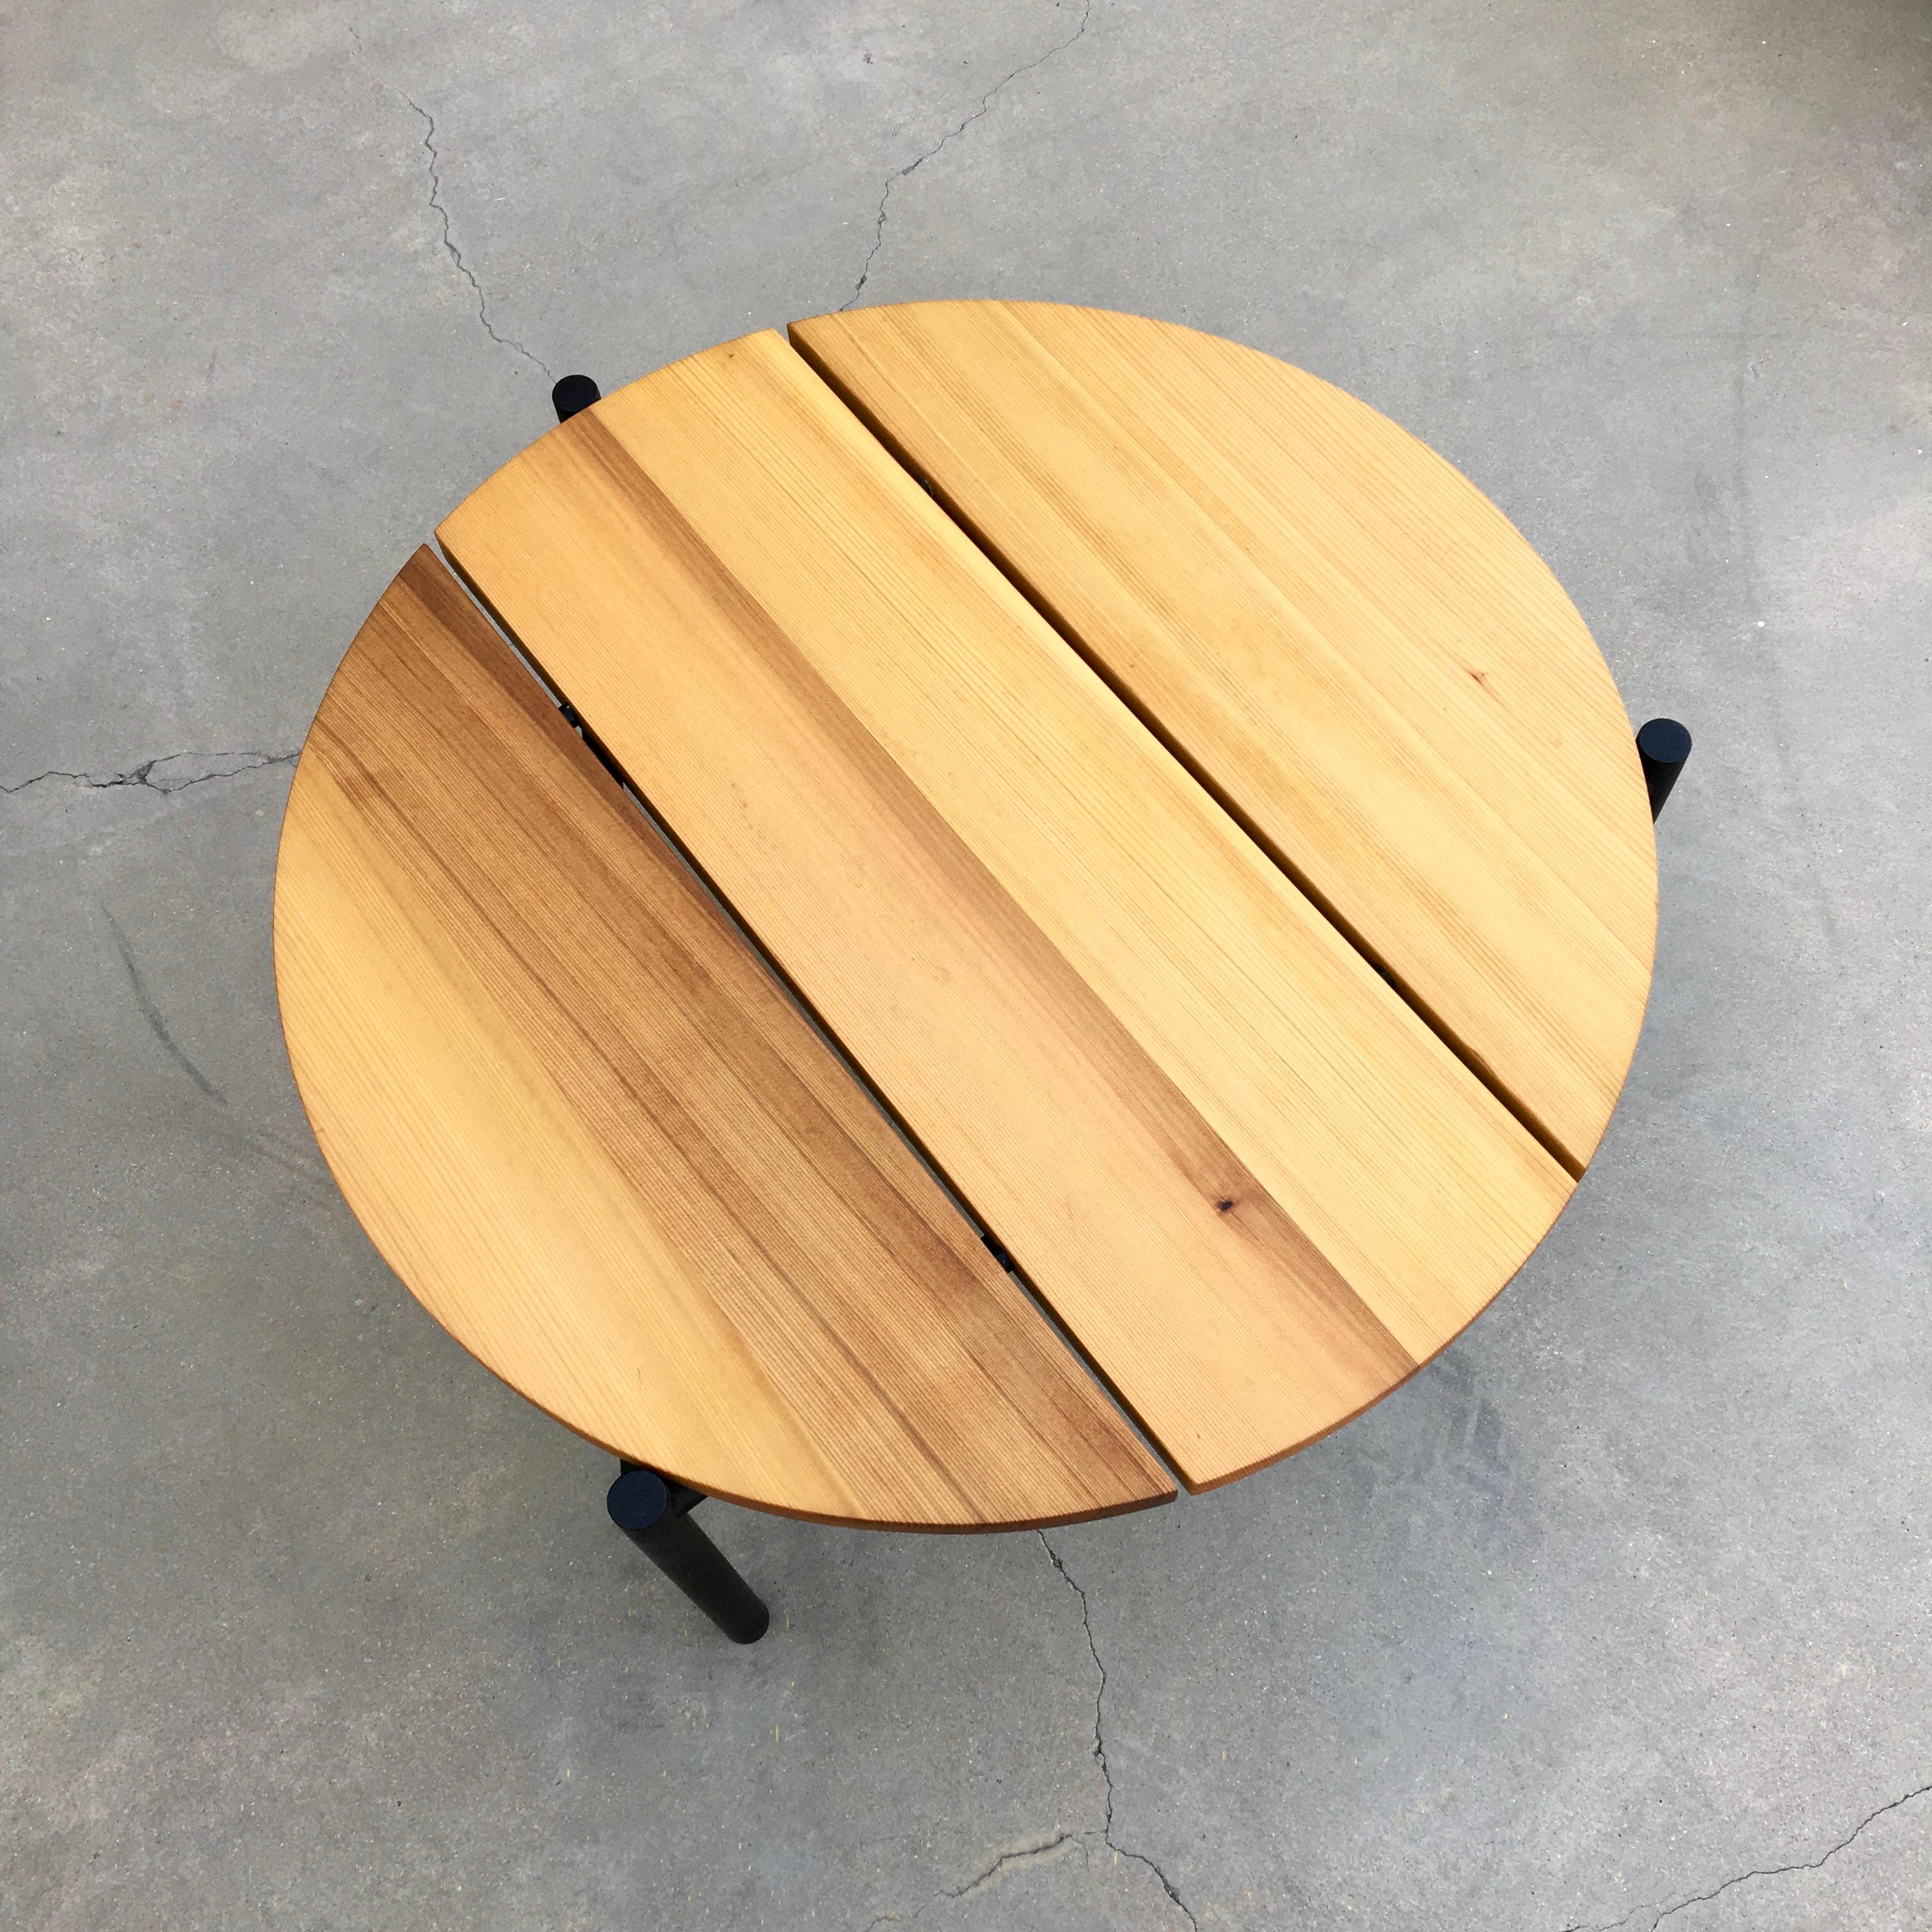 This table is part of the Madeira Line from Ten10. The table is made to order. The top is solid plank oiled vertical grain western red cedar. The planks are 1 1/4